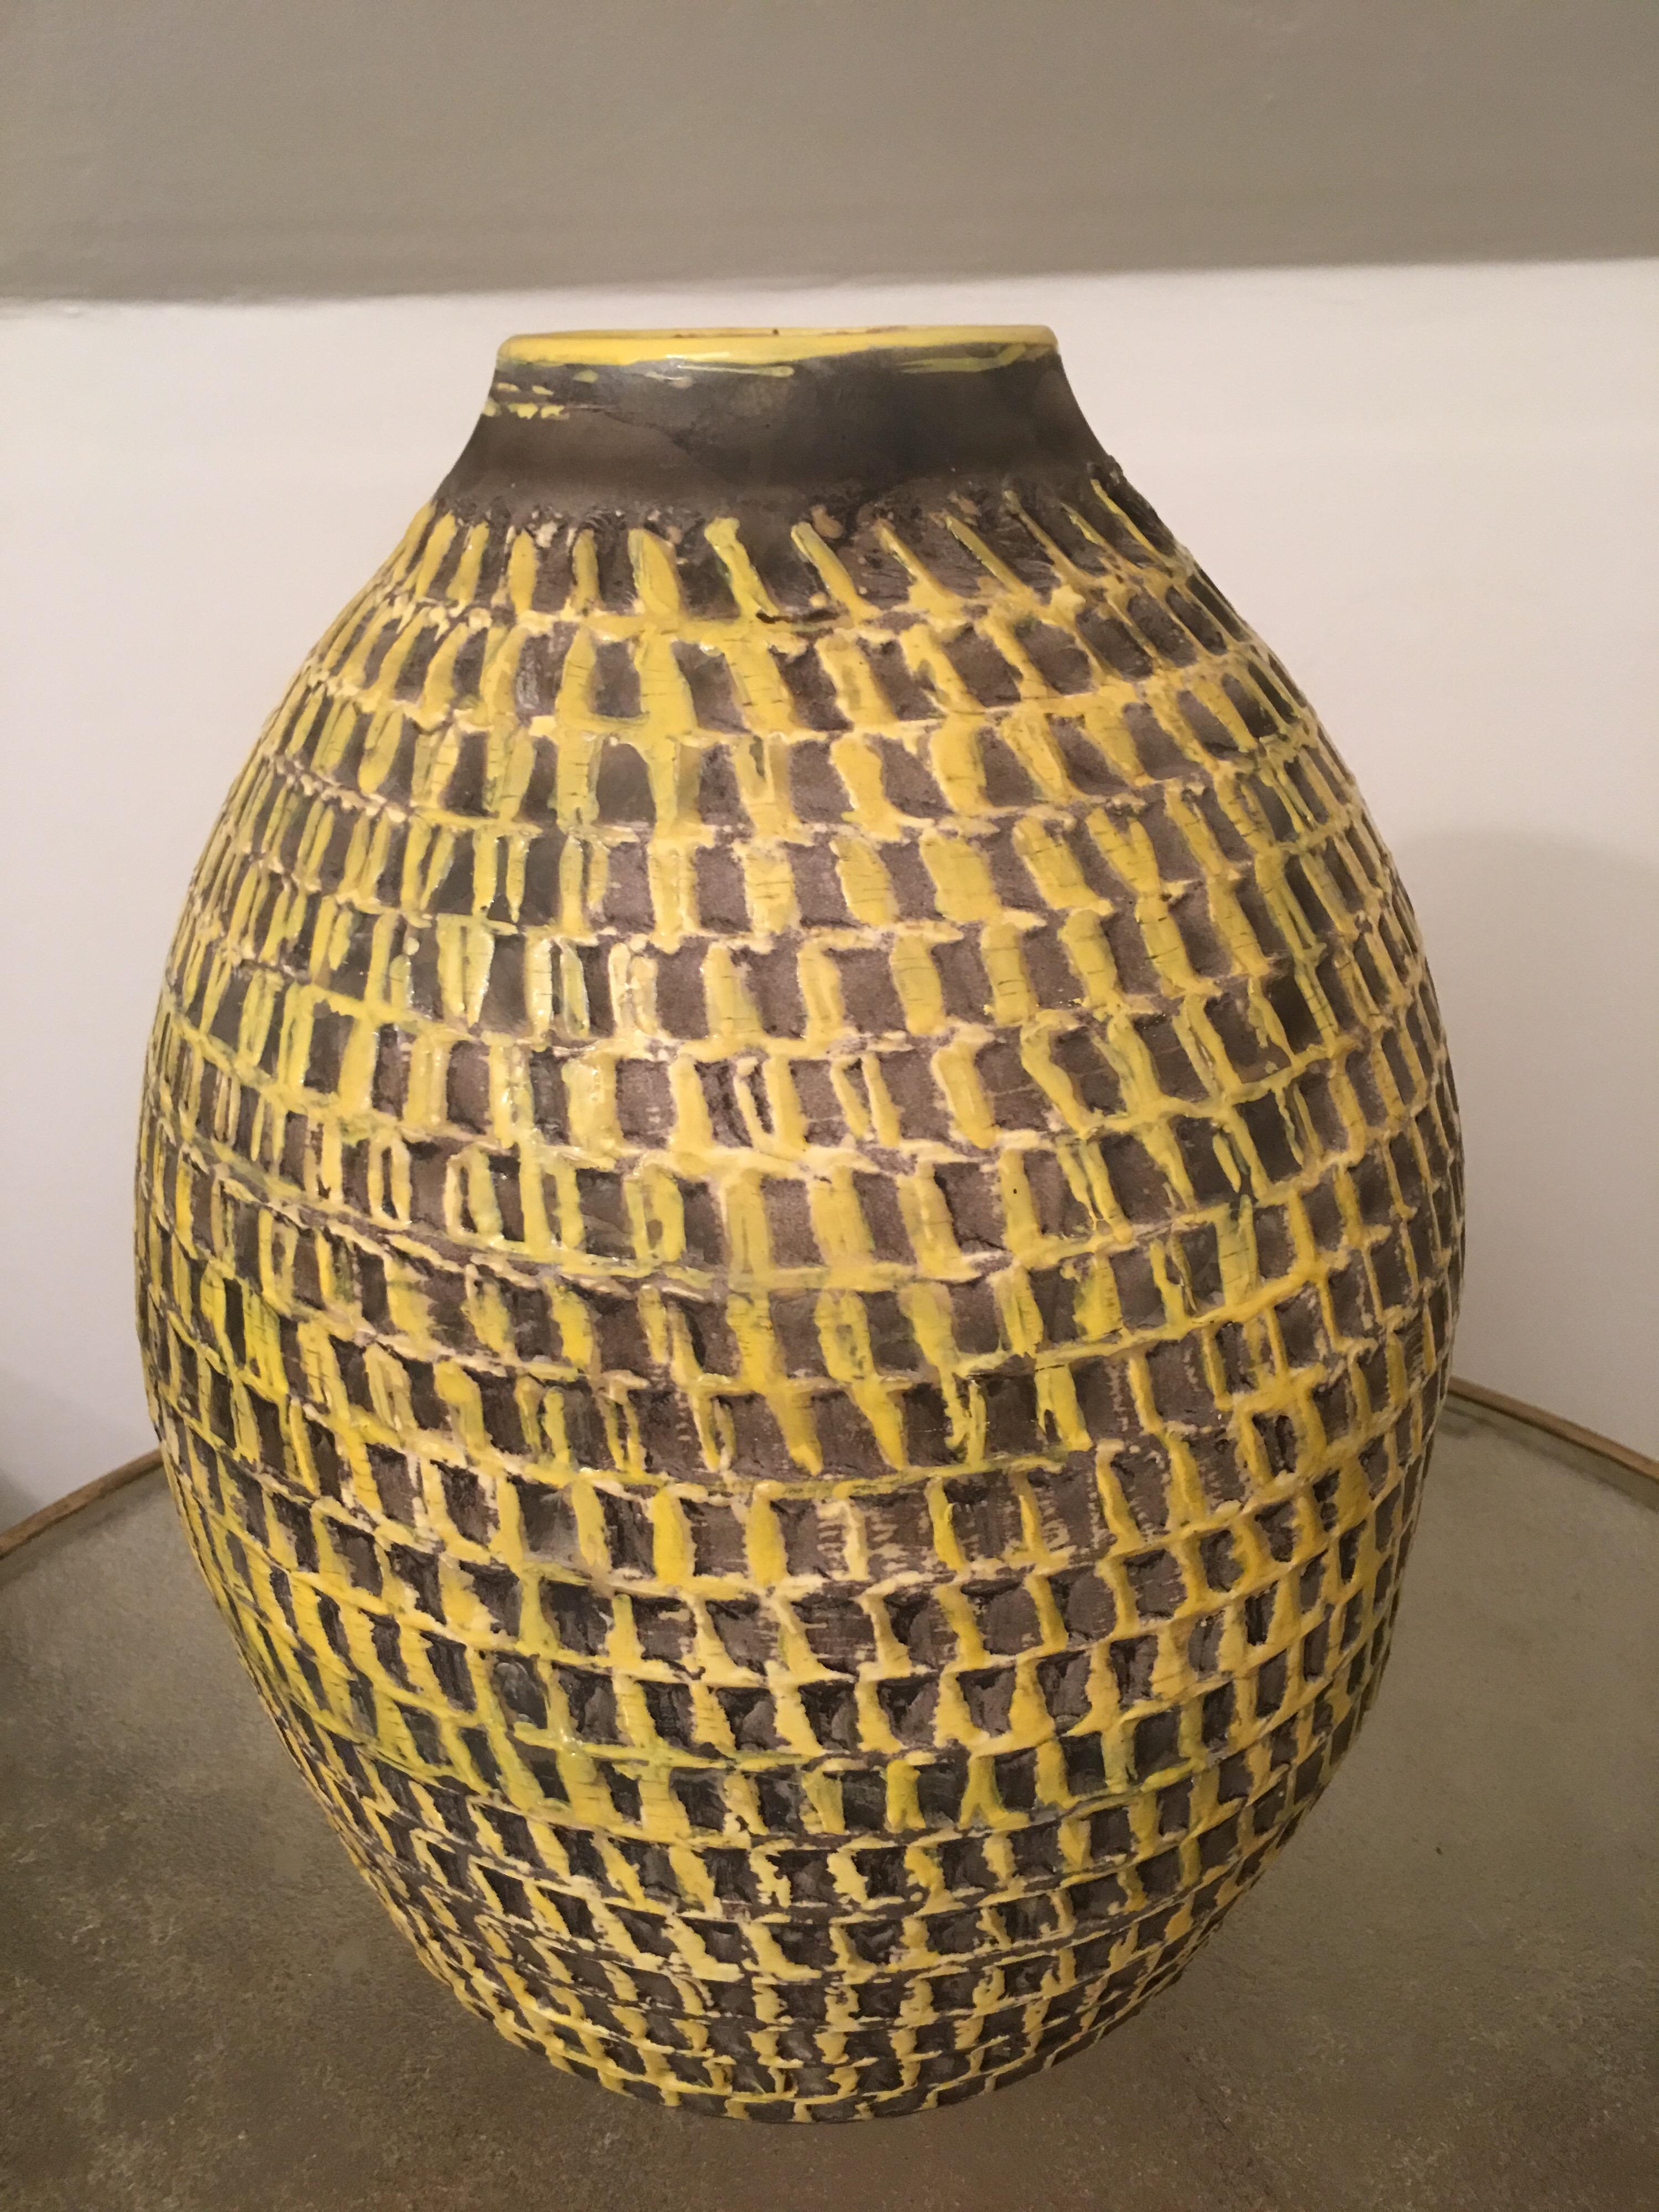 Art Deco Jean Besnard Signed Large Yellow Ceramic Vase, Incised Decor, French, 1930s For Sale